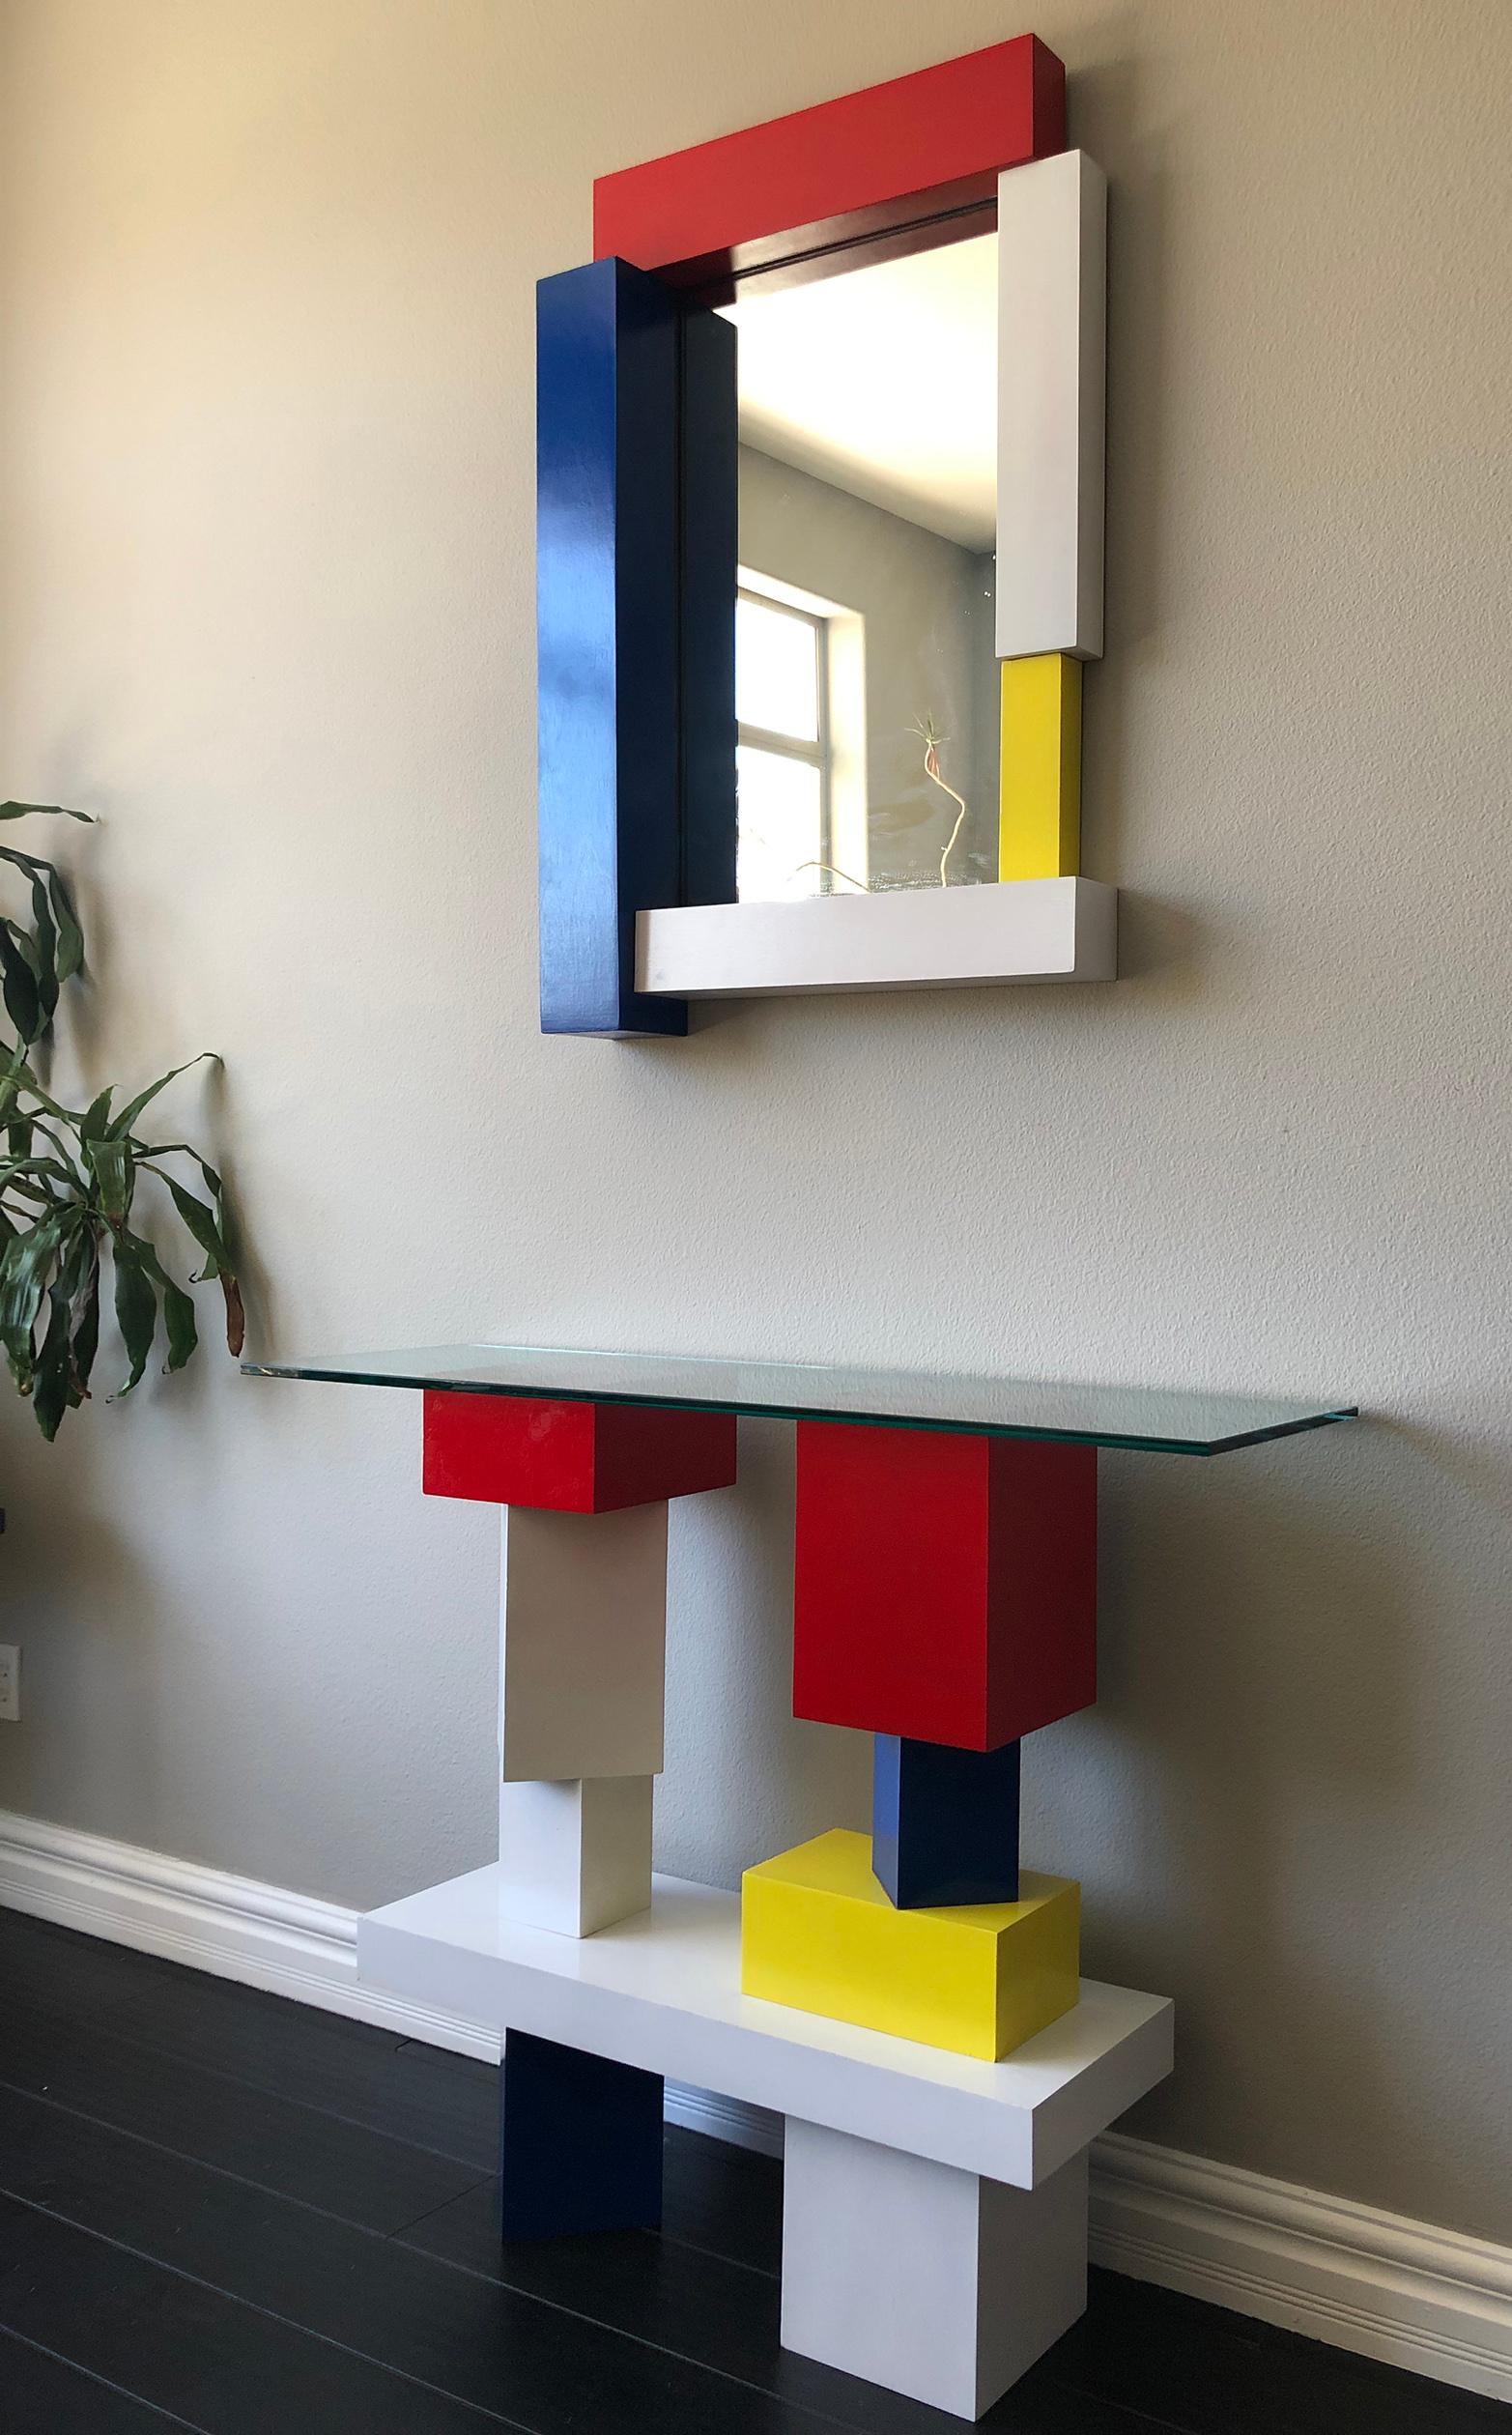 An absolutely stunning pieces of furniture, these pieces are both equally as artistic as they are functional. The console table has an incredibly modern, Piet Mondrian and De Stijl vibe with an almost postmodern, Memphis Milano flair. Would look